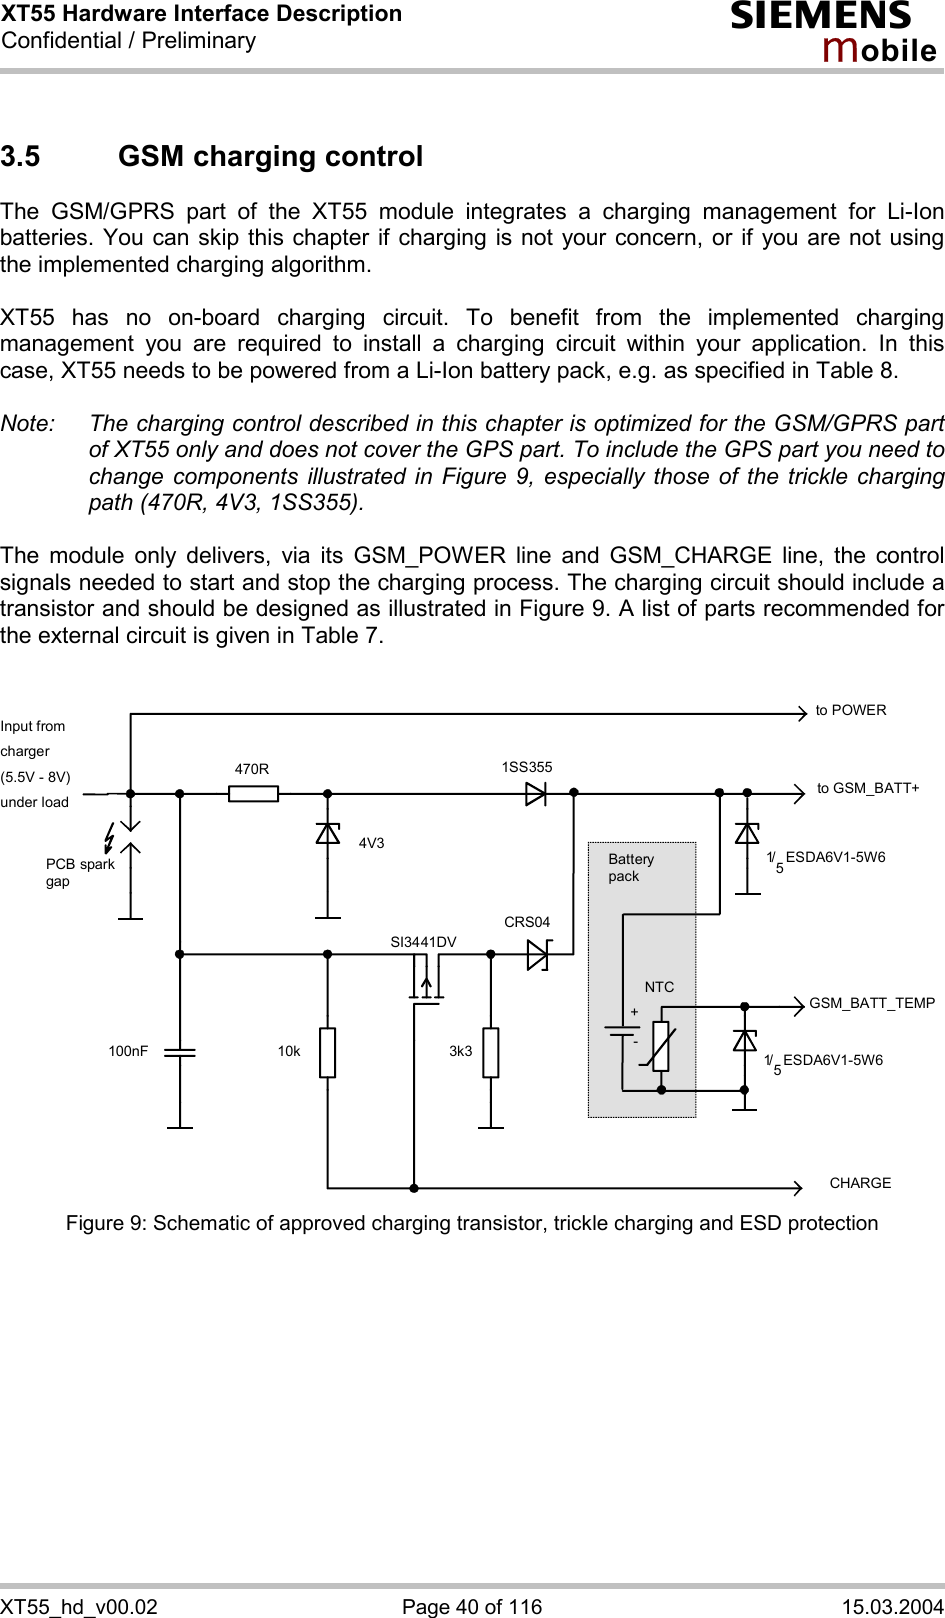 XT55 Hardware Interface Description Confidential / Preliminary s mo b i l e XT55_hd_v00.02  Page 40 of 116  15.03.2004 3.5  GSM charging control The GSM/GPRS part of the XT55 module integrates a charging management for Li-Ion batteries. You can skip this chapter if charging is not your concern, or if you are not using the implemented charging algorithm.  XT55 has no on-board charging circuit. To benefit from the implemented charging management you are required to install a charging circuit within your application. In this case, XT55 needs to be powered from a Li-Ion battery pack, e.g. as specified in Table 8.  Note:  The charging control described in this chapter is optimized for the GSM/GPRS part of XT55 only and does not cover the GPS part. To include the GPS part you need to change components illustrated in Figure 9, especially those of the trickle charging path (470R, 4V3, 1SS355).  The module only delivers, via its GSM_POWER line and GSM_CHARGE line, the control signals needed to start and stop the charging process. The charging circuit should include a transistor and should be designed as illustrated in Figure 9. A list of parts recommended for the external circuit is given in Table 7.   to GSM_BATT+Input fromcharger(5.5V - 8V)under loadCHARGE470R 1SS3553k3100nF 10kSI3441DV4V31/ 5 ESDA6V1-5W6to POWERGSM_BATT_TEMP1/ 5 ESDA6V1-5W6NTC+Battery packPCB spark gapCRS04- Figure 9: Schematic of approved charging transistor, trickle charging and ESD protection  